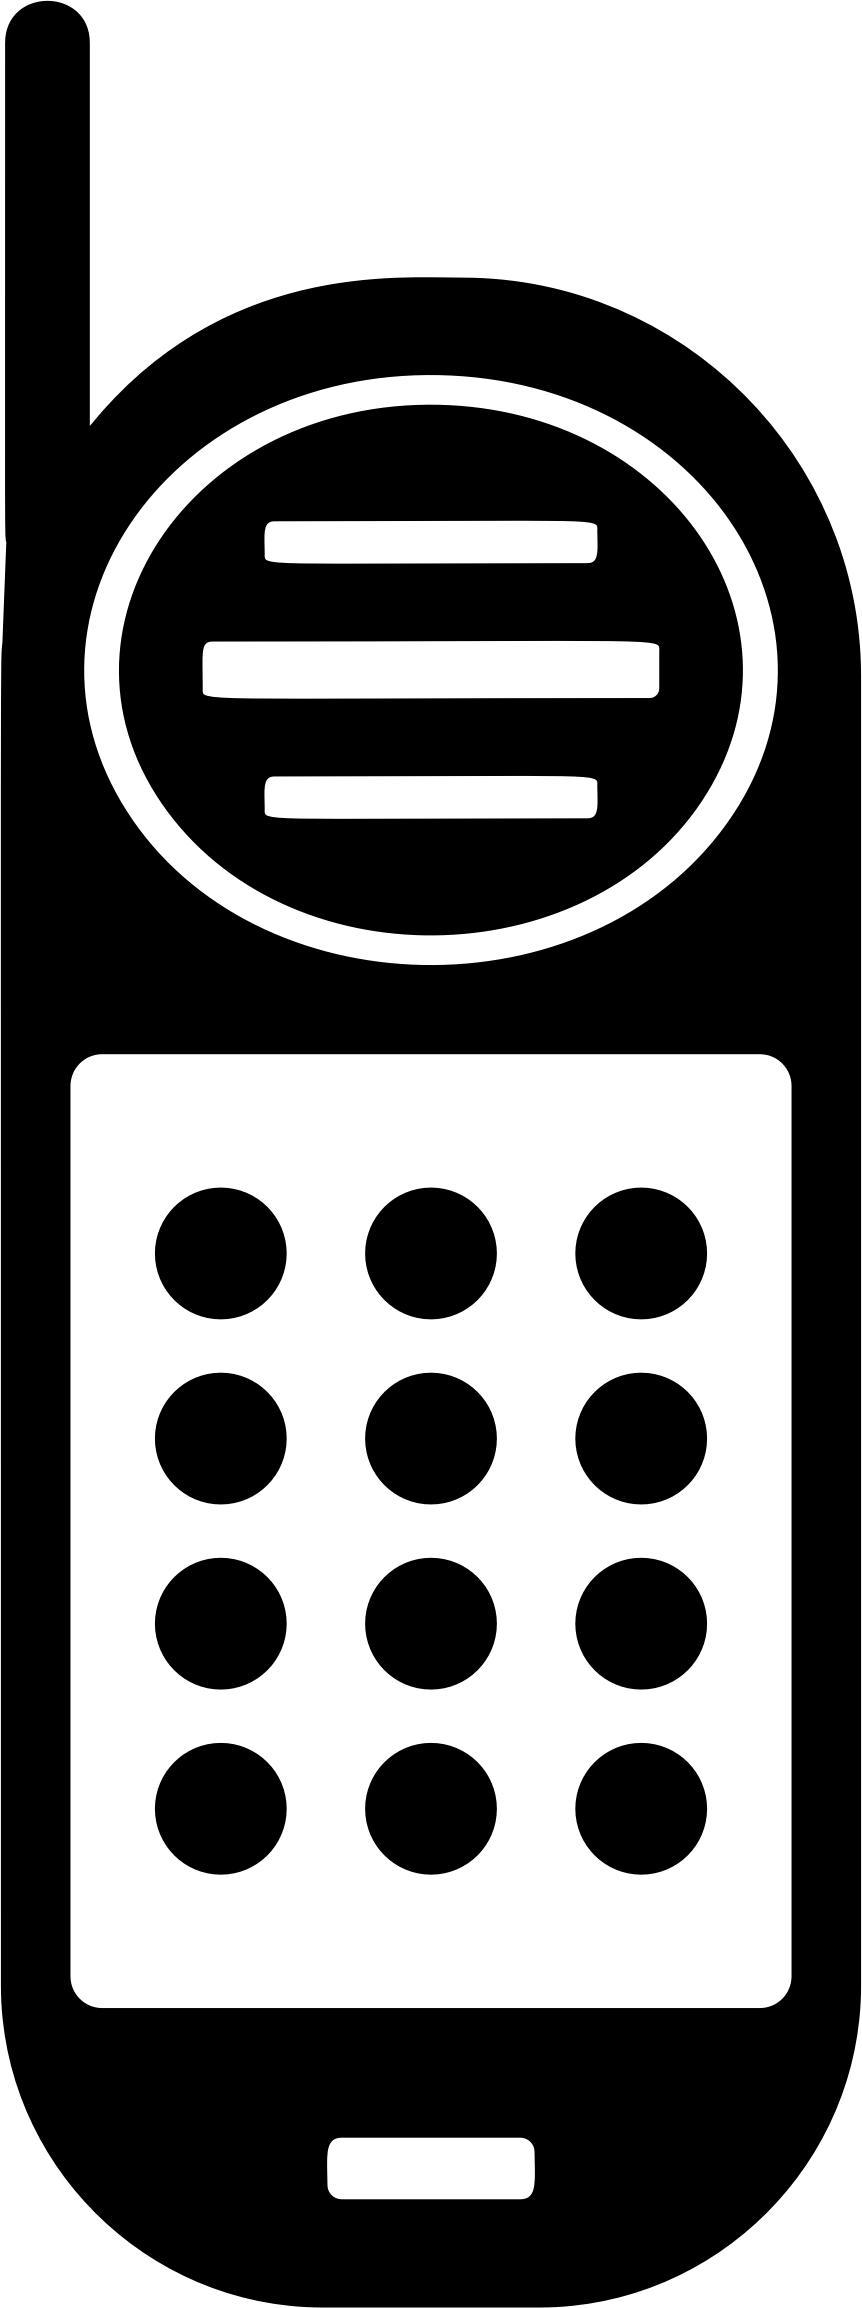 Cellphone Icon Redrawn png transparent